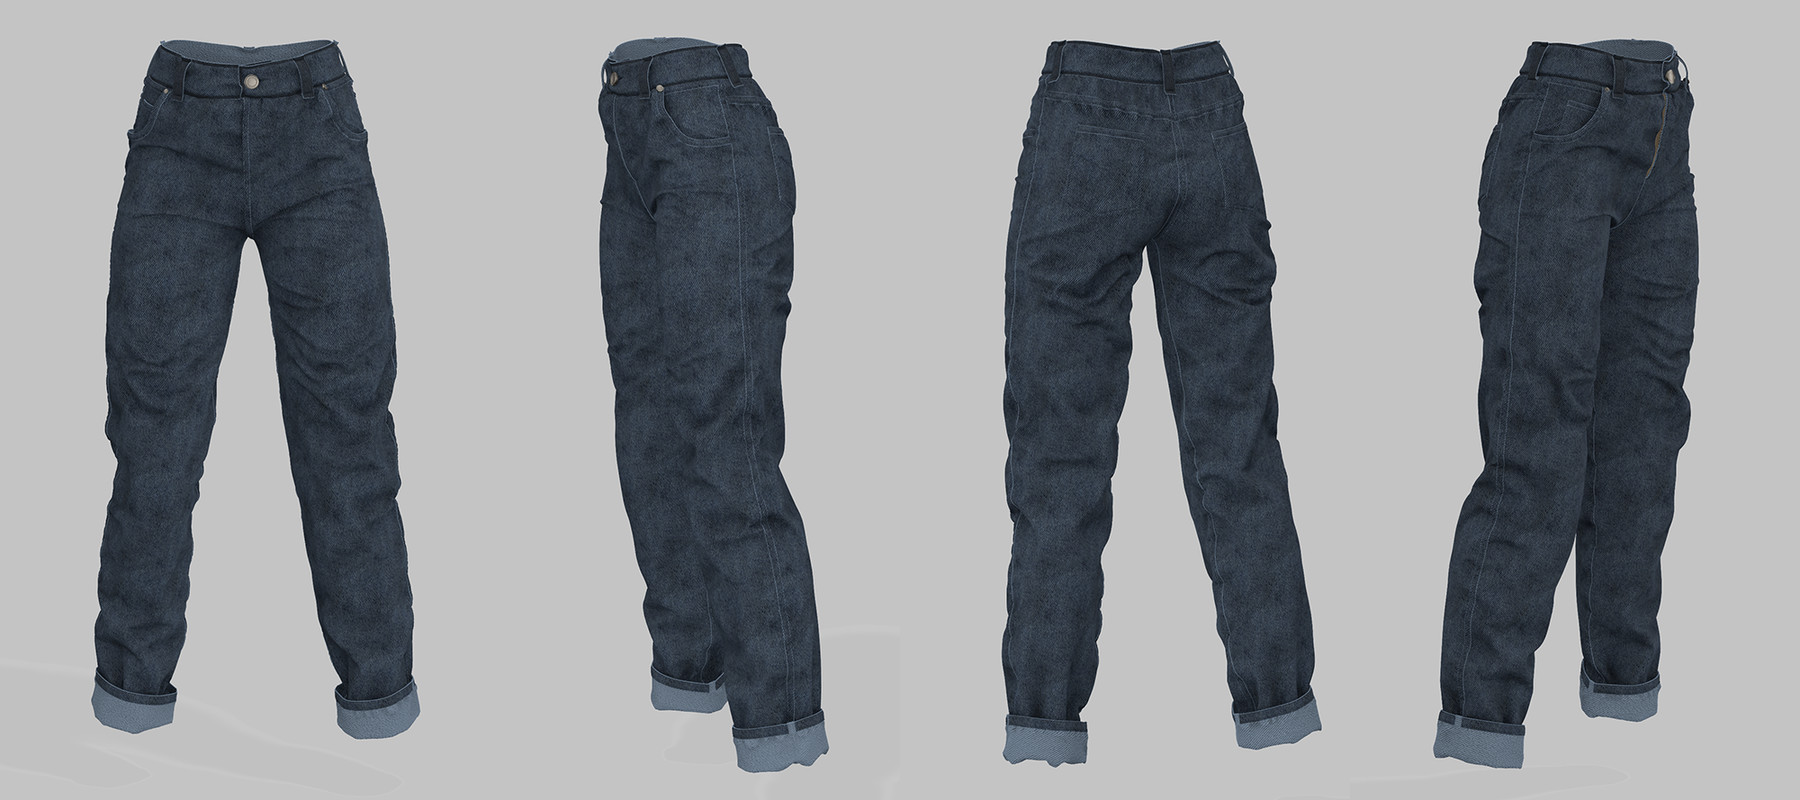 ArtStation - Tutorial. MD, Clo3d Realistic jeans. 2H Video process with ...